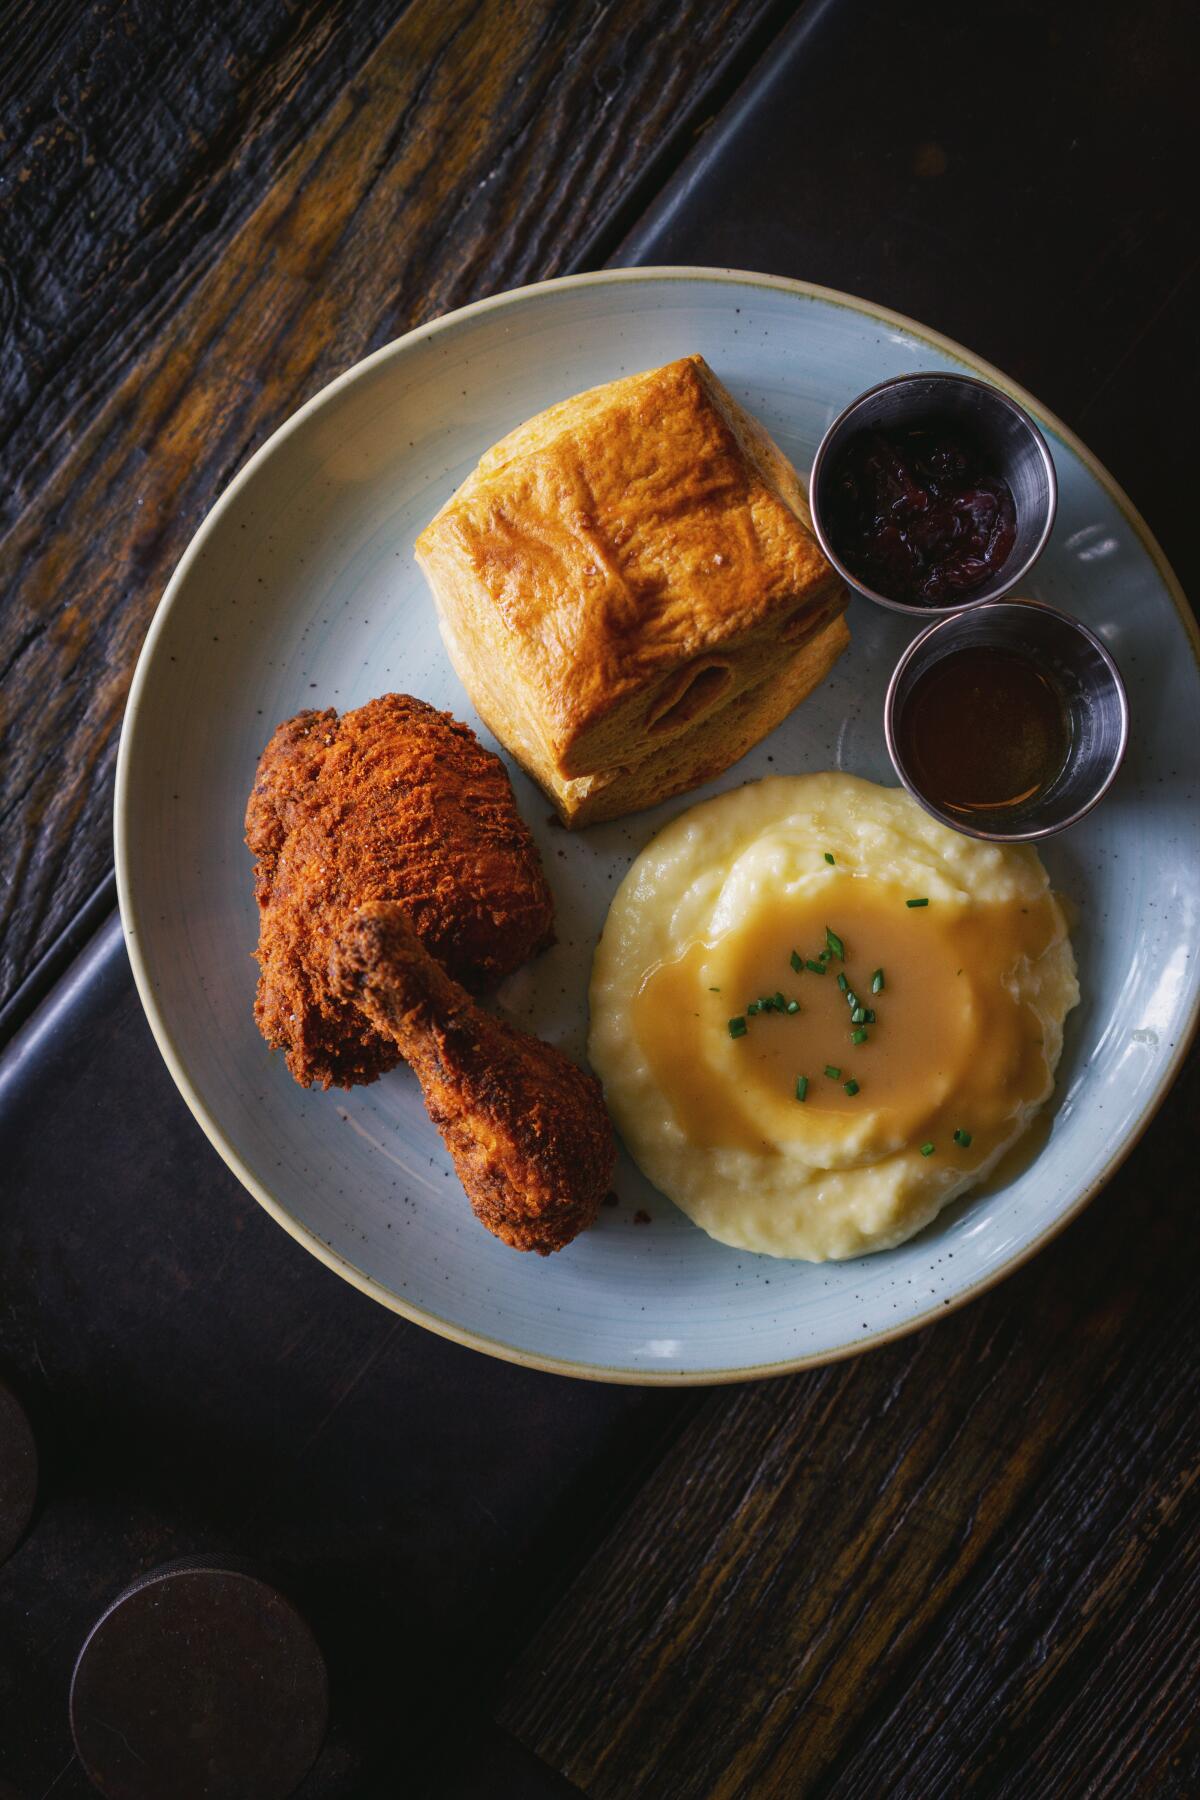 A photo of the two-piece fried chicken combo meal from Craft & Commerce